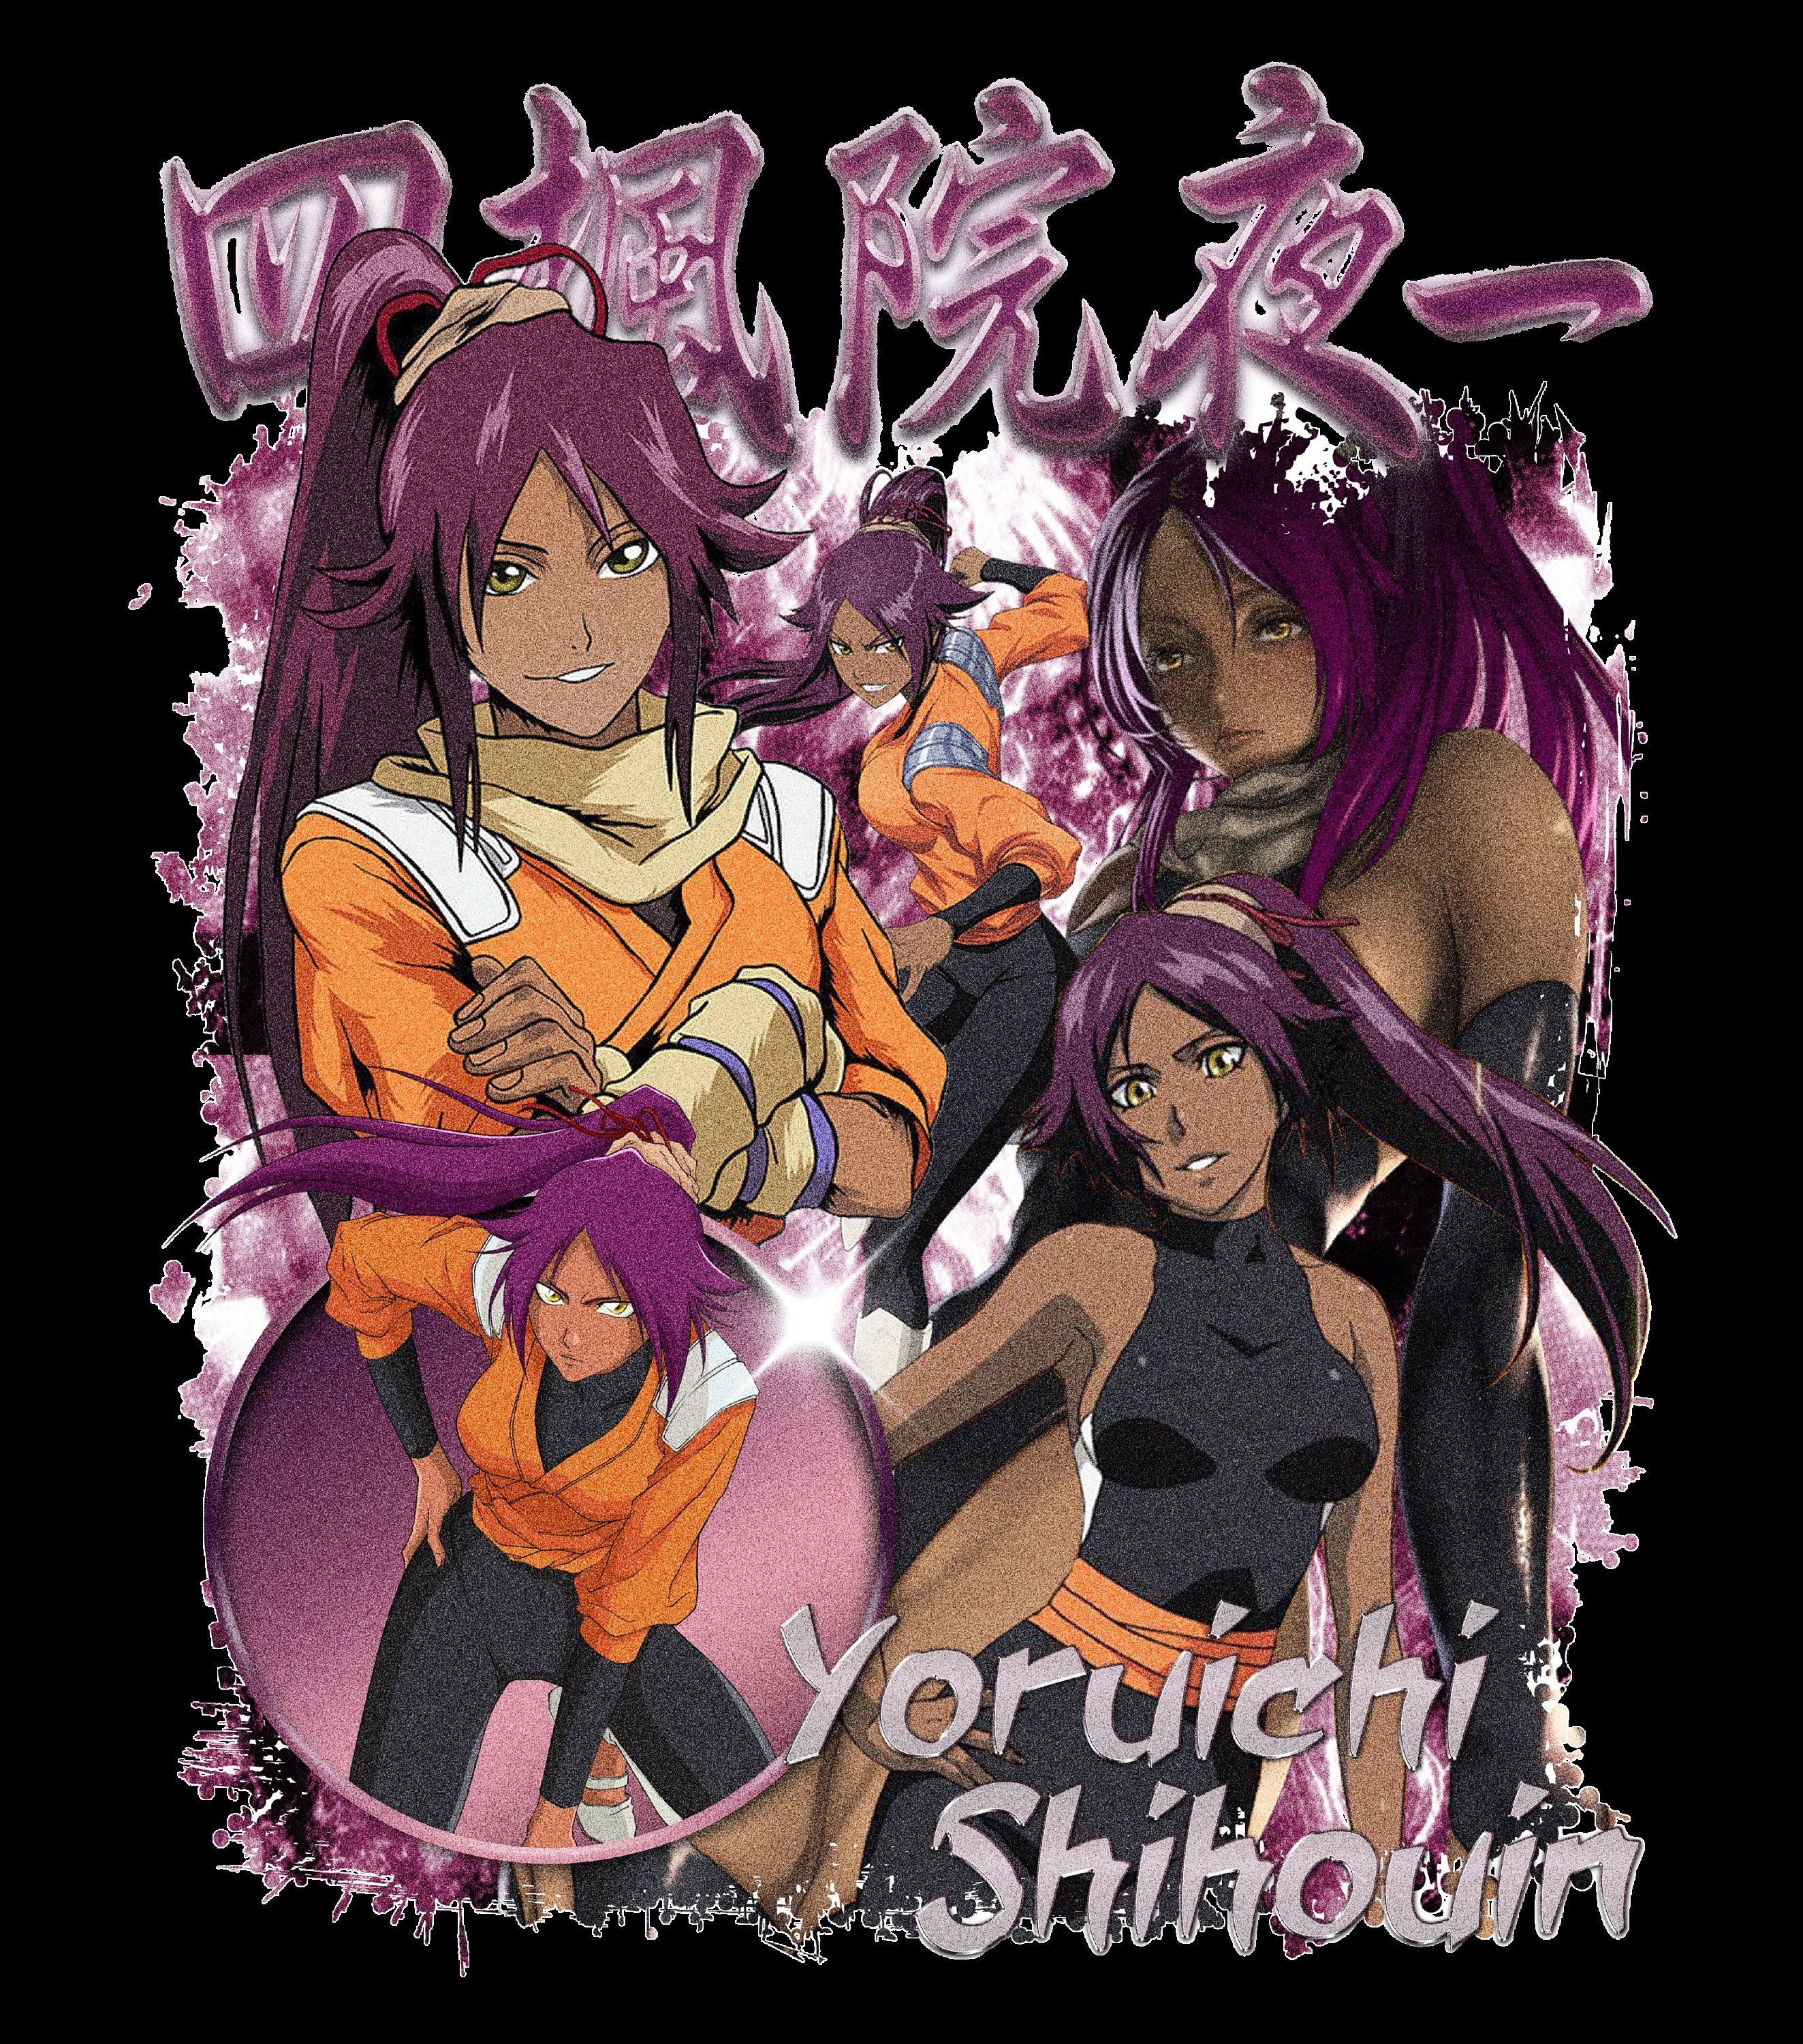 Digital Download Yoruichi Shihouin From the Anime Bleach, Black Anime,  African American Anime, Female Anime - Etsy